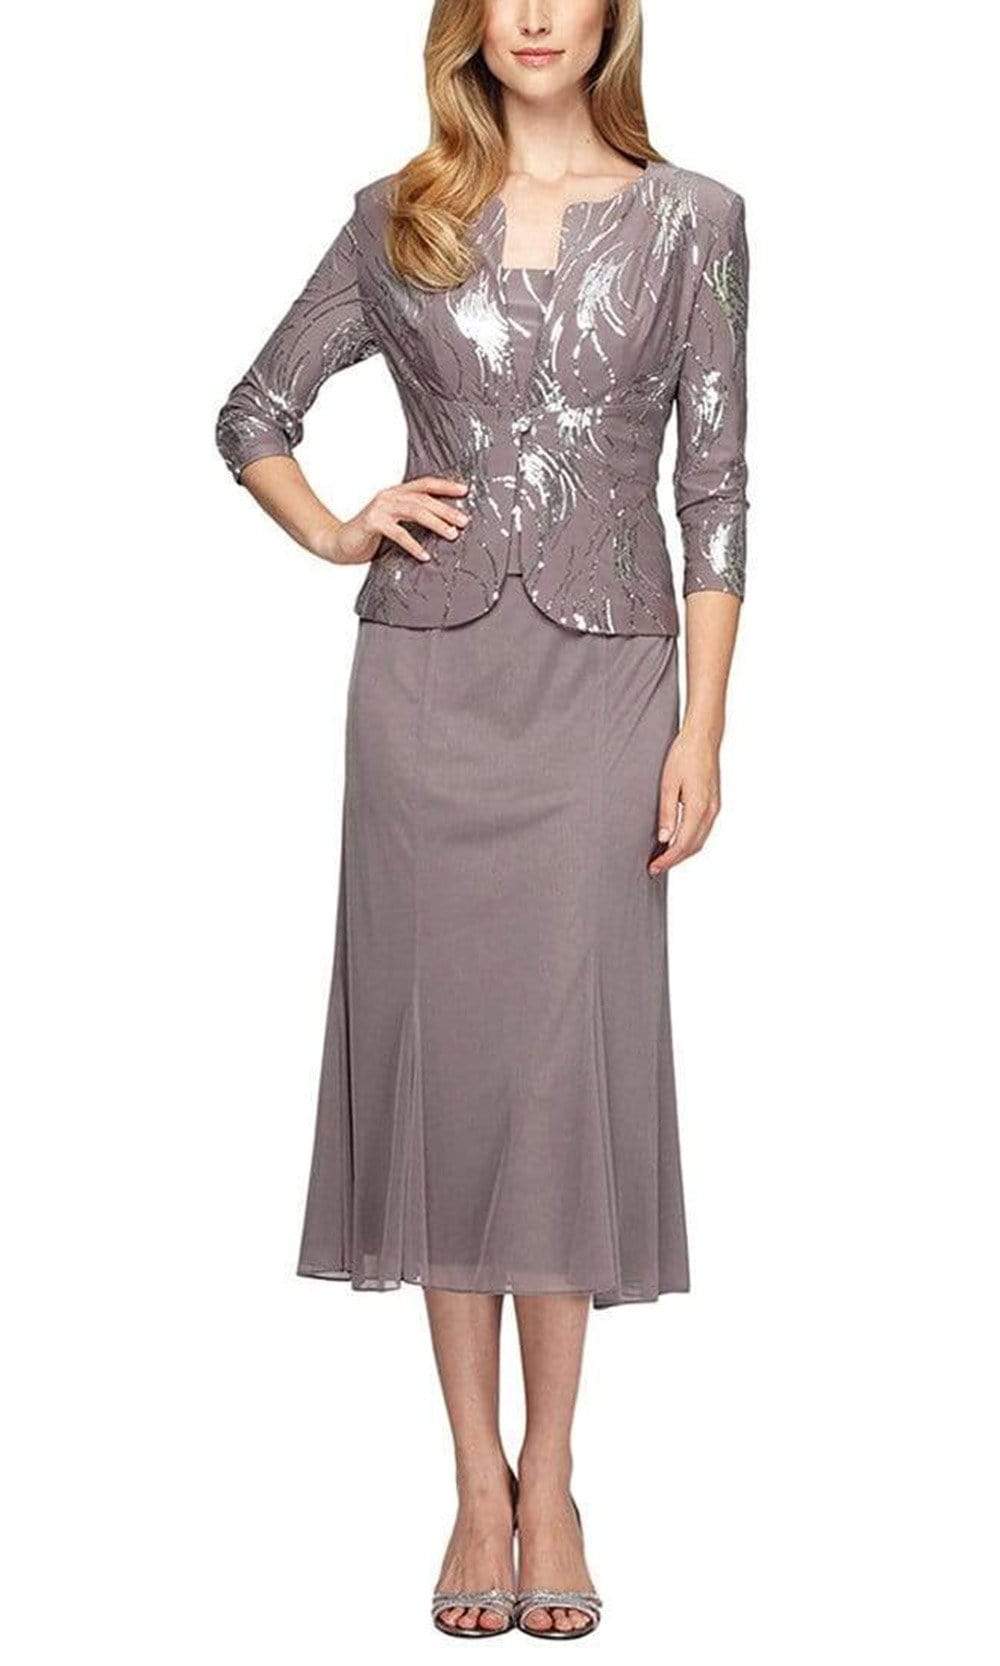 Alex Evenings - 196267 Chiffon Dress with Sequin Embellished Jacket
